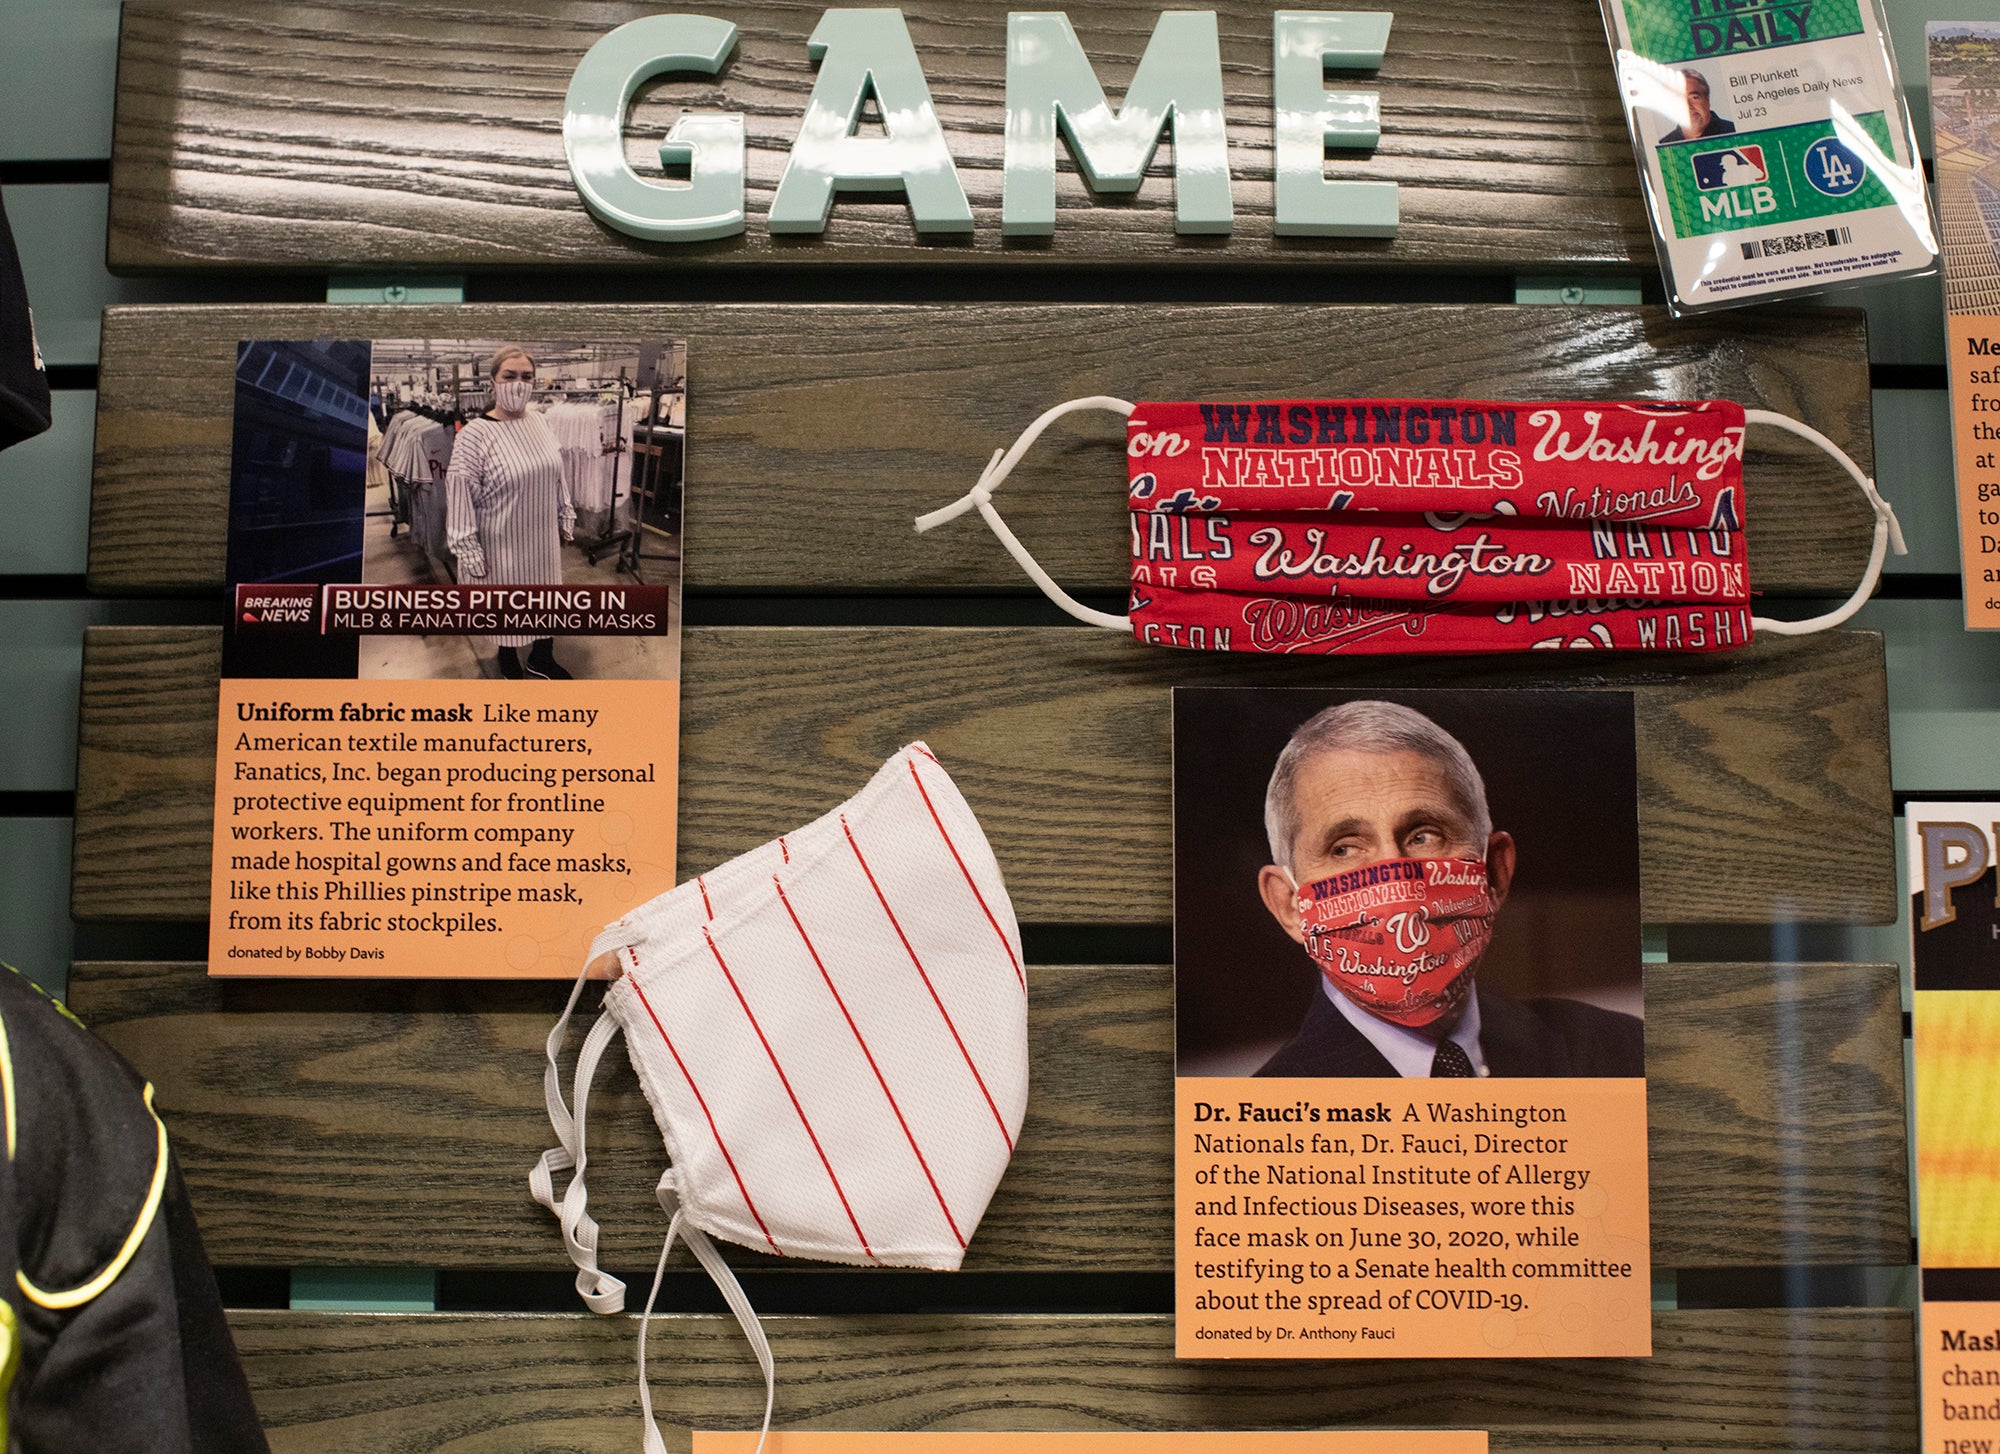 Artifacts tell the story of baseball in a pandemic